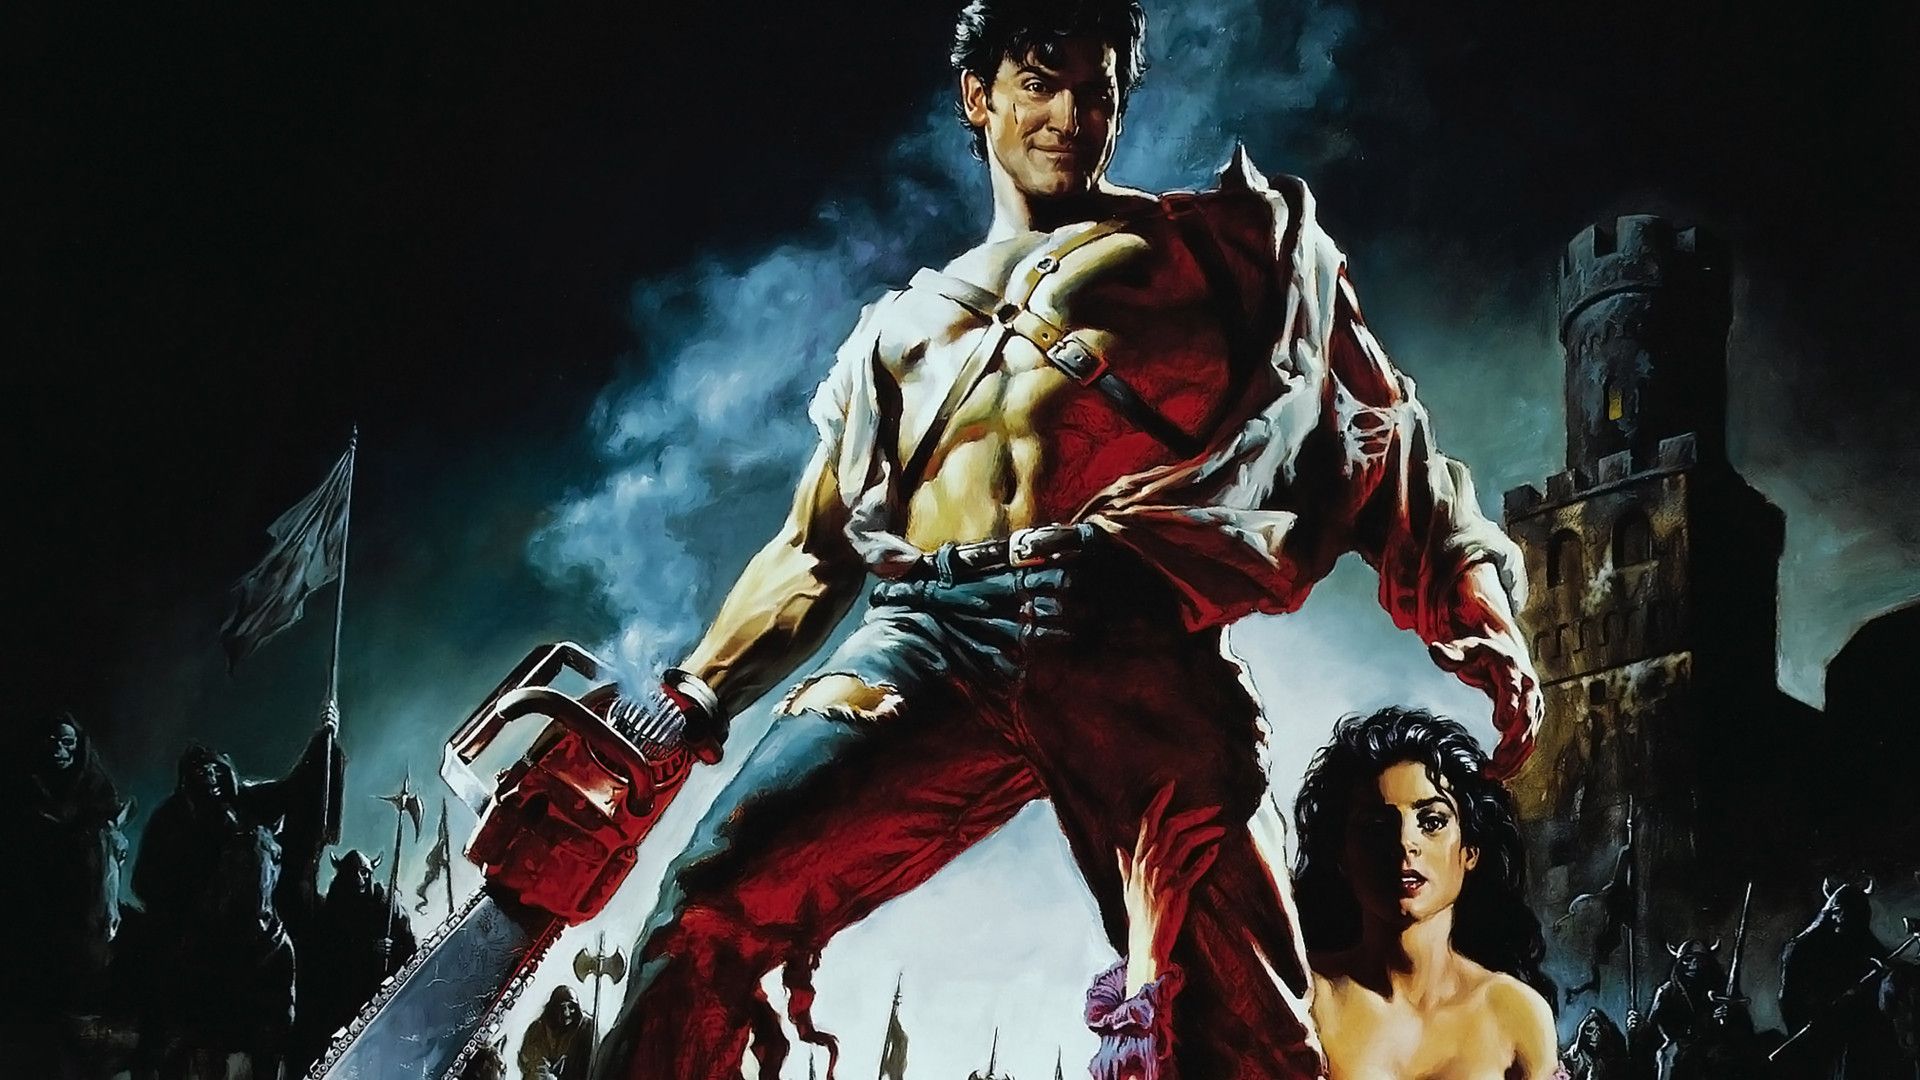 Army of darkness 01 1920x1080